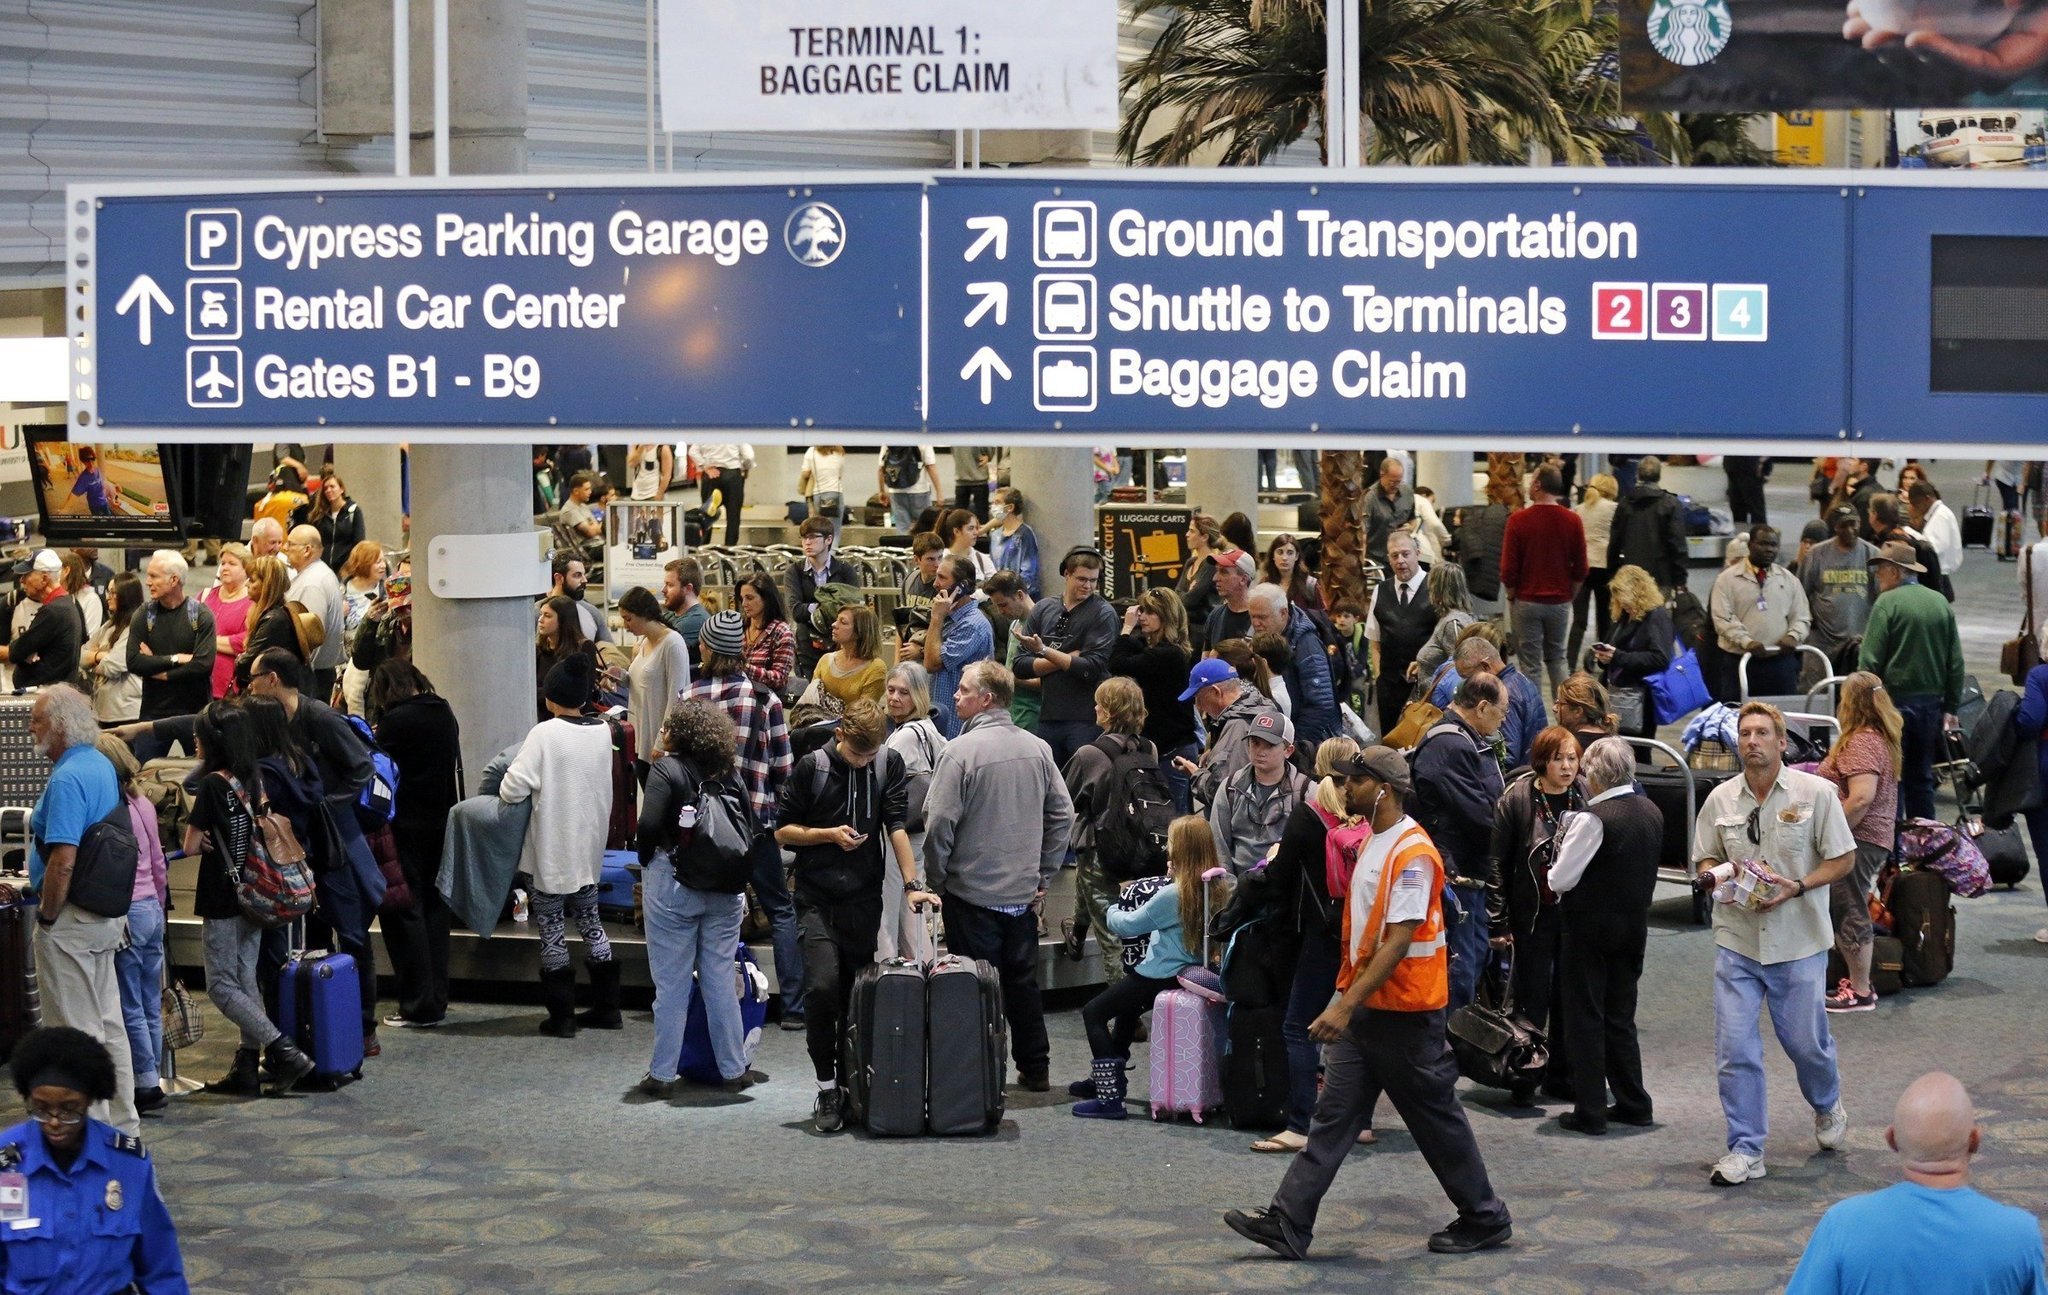 Baggage claim areas of airports seen as most vulnerable to firearms ...